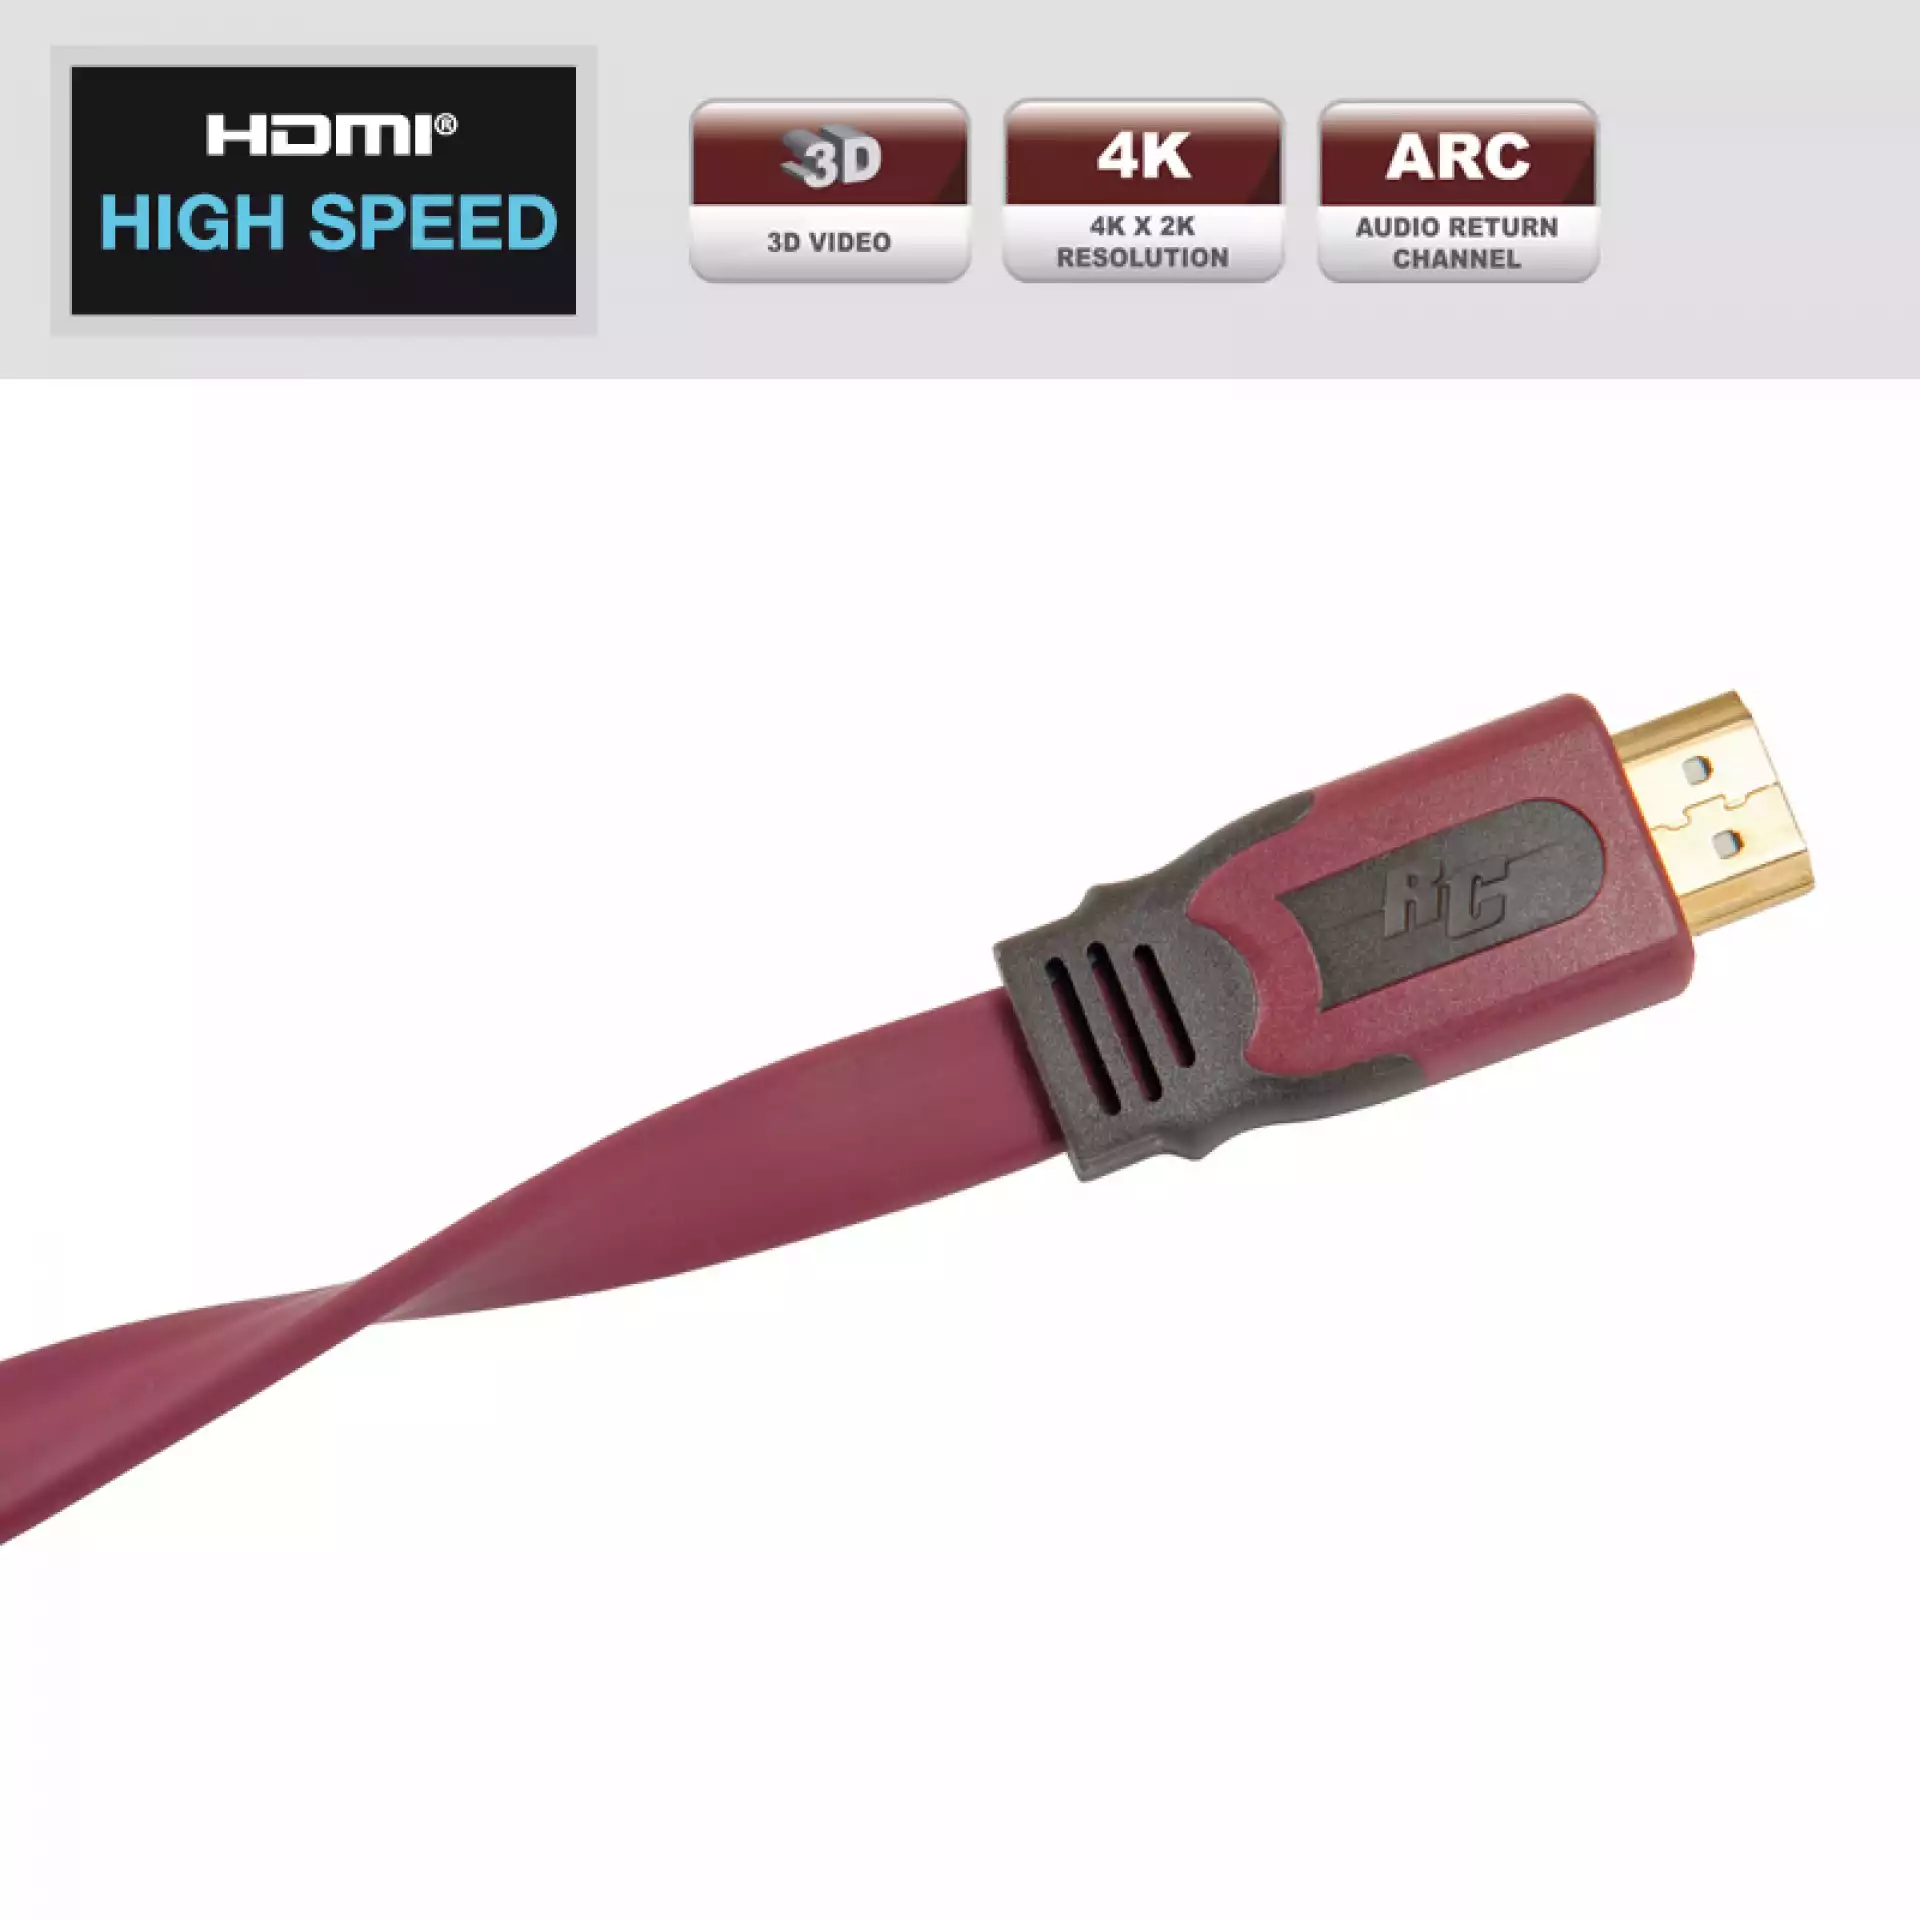 REAL CABLE HD E FLAT 3m